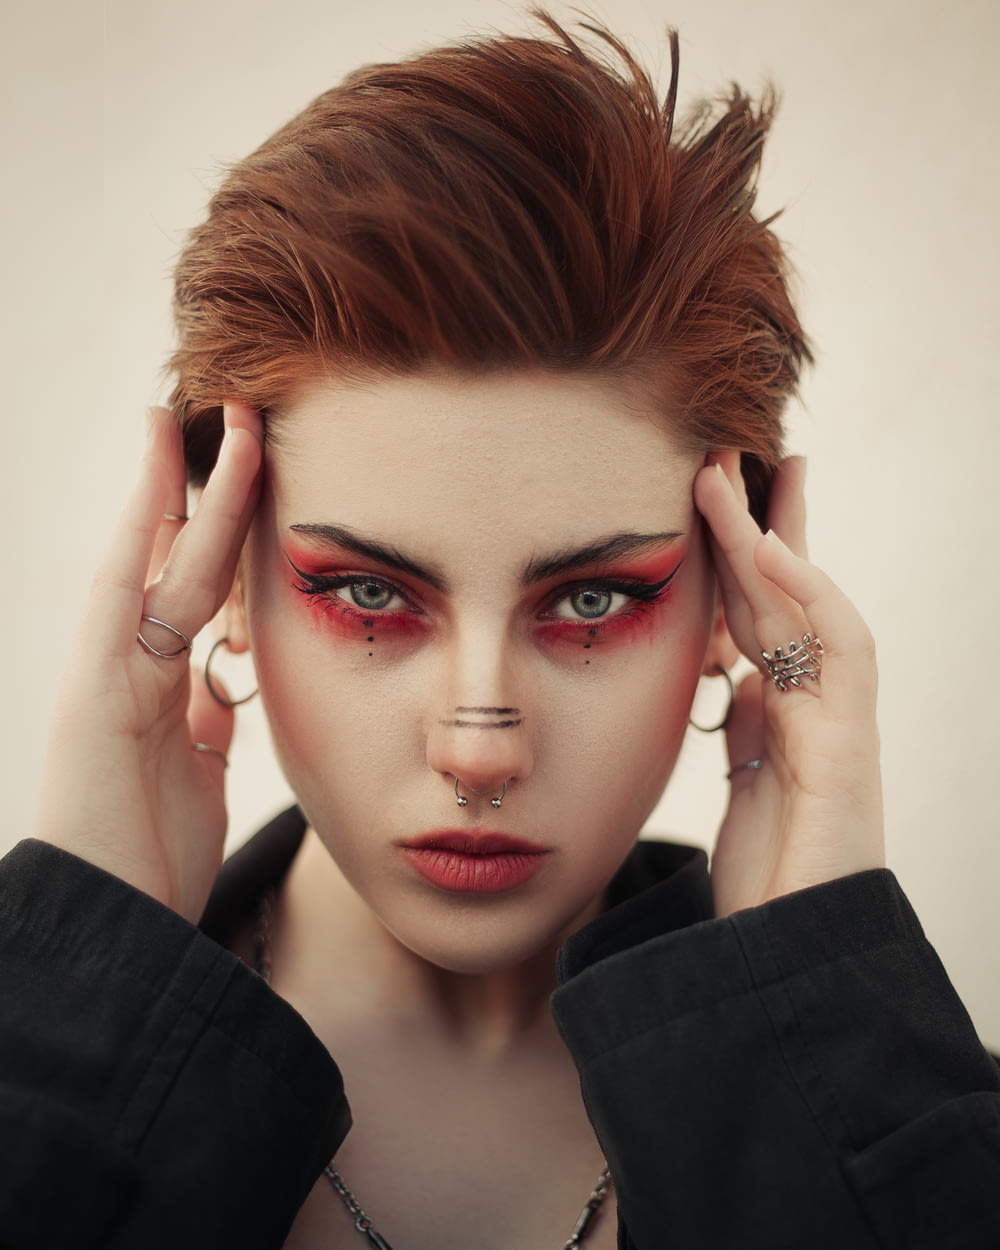 a woman with red makeup and piercings on her face